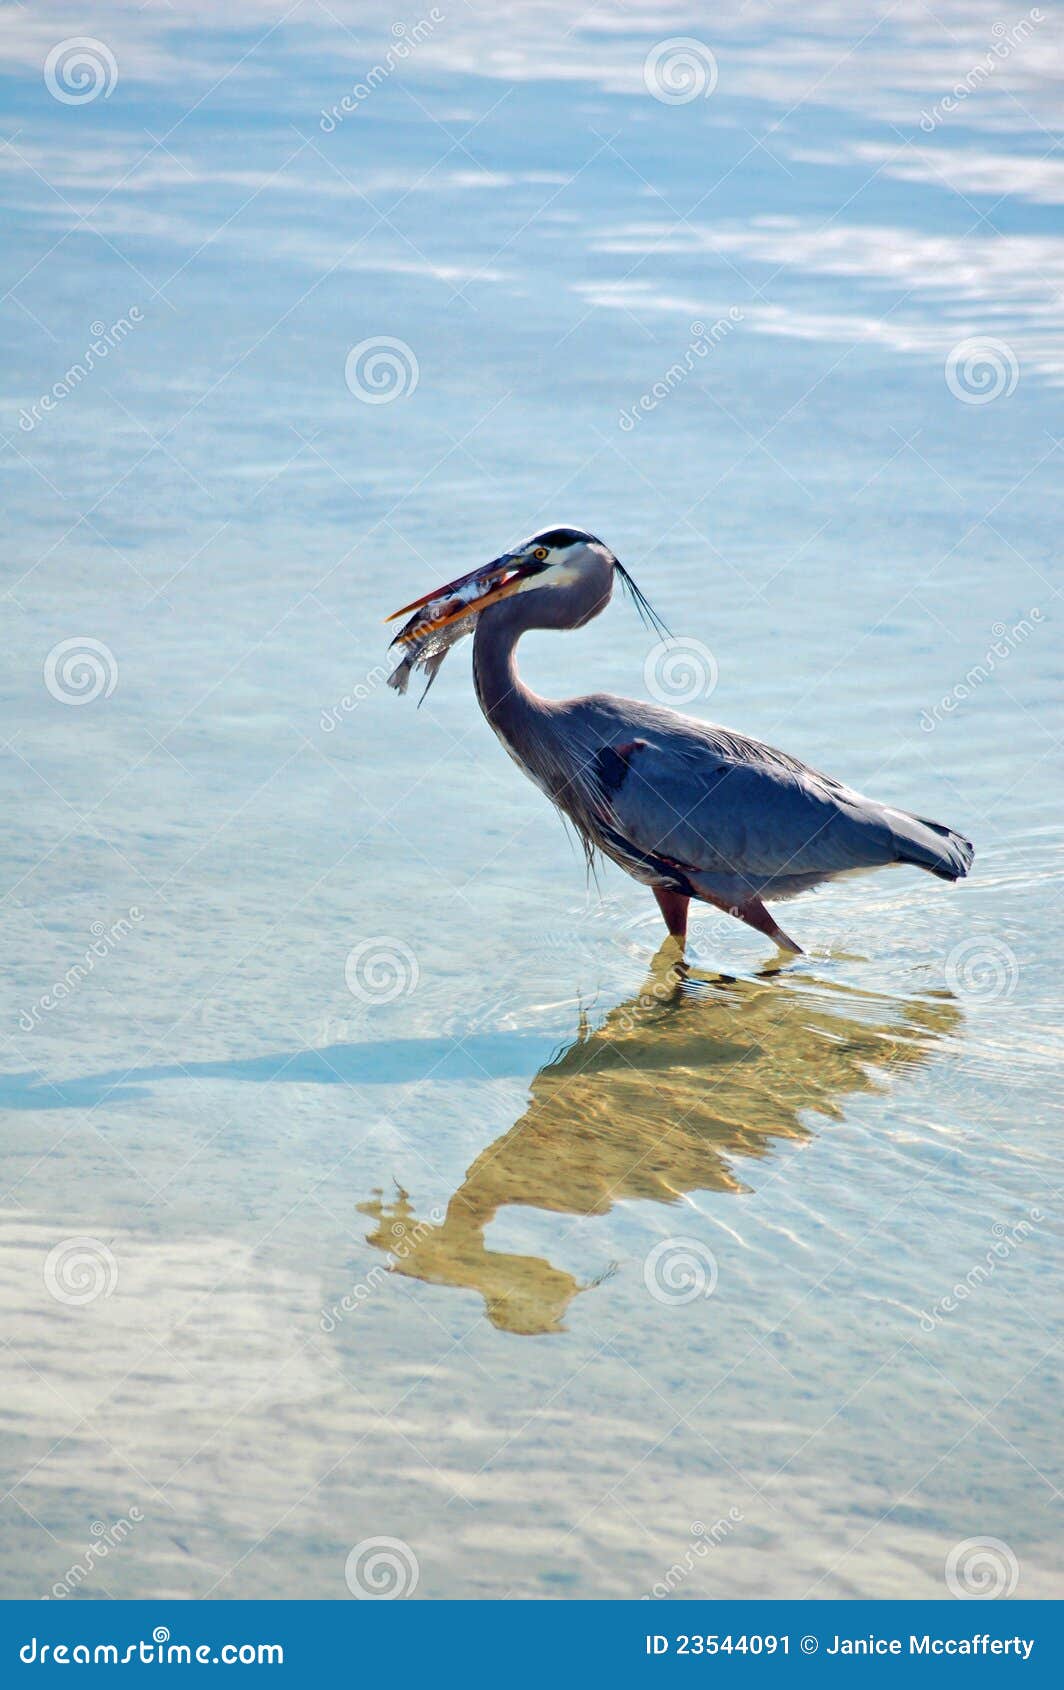 great blue heron with pompano fish